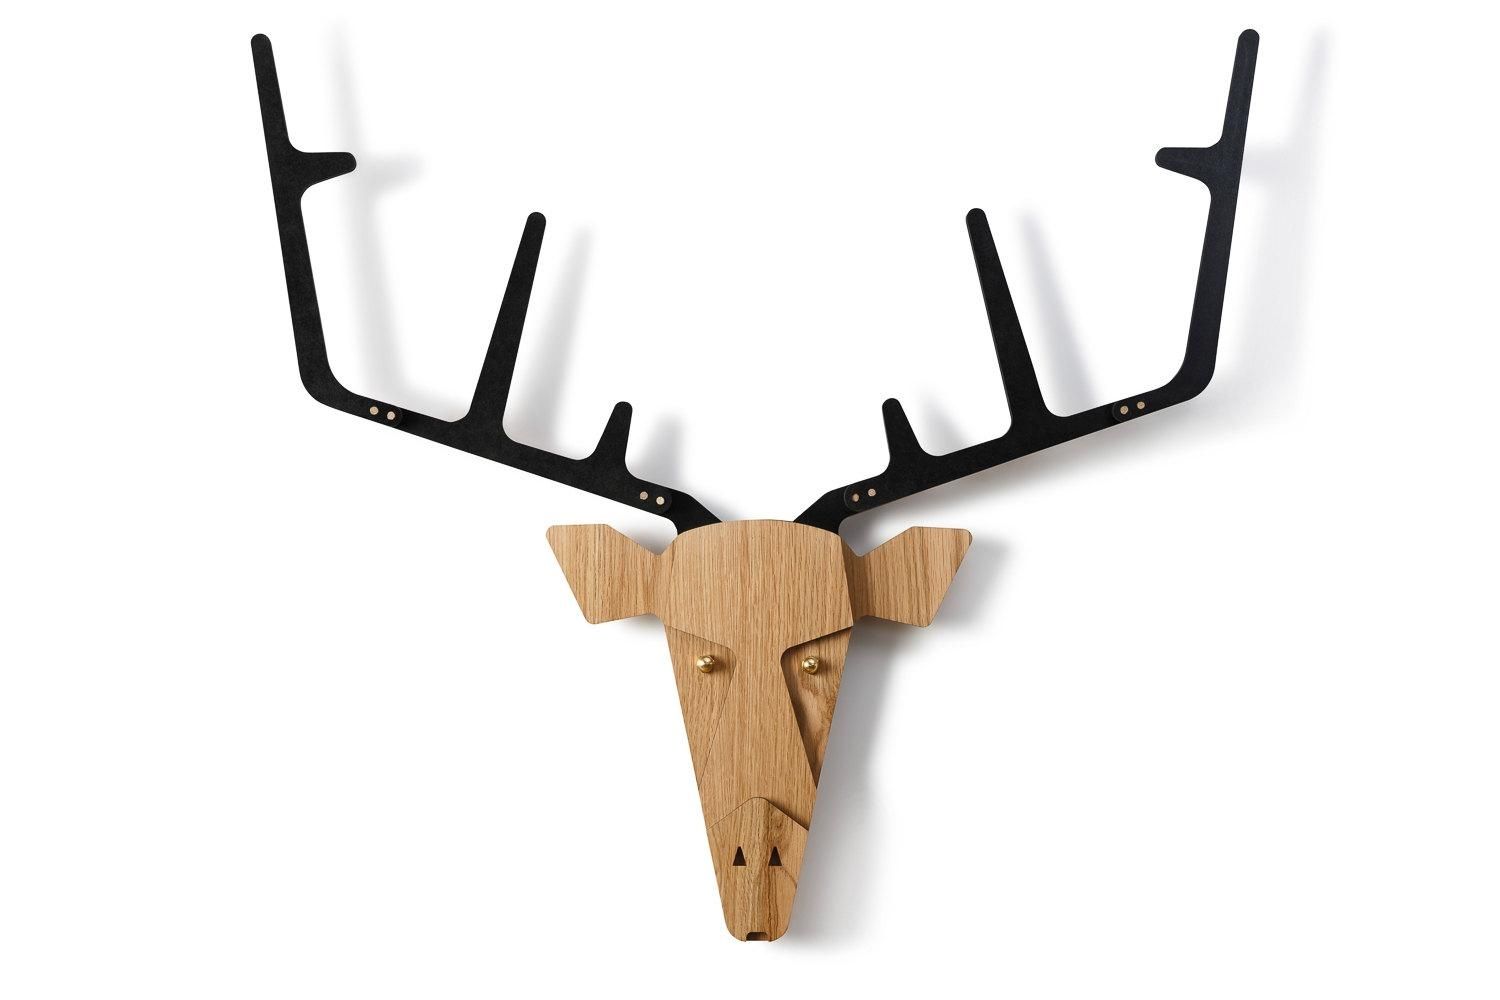 Wooden Deer Head Wall Art Decor Deer Head Animal Head Stag For Stag Head Wall Art (View 8 of 20)